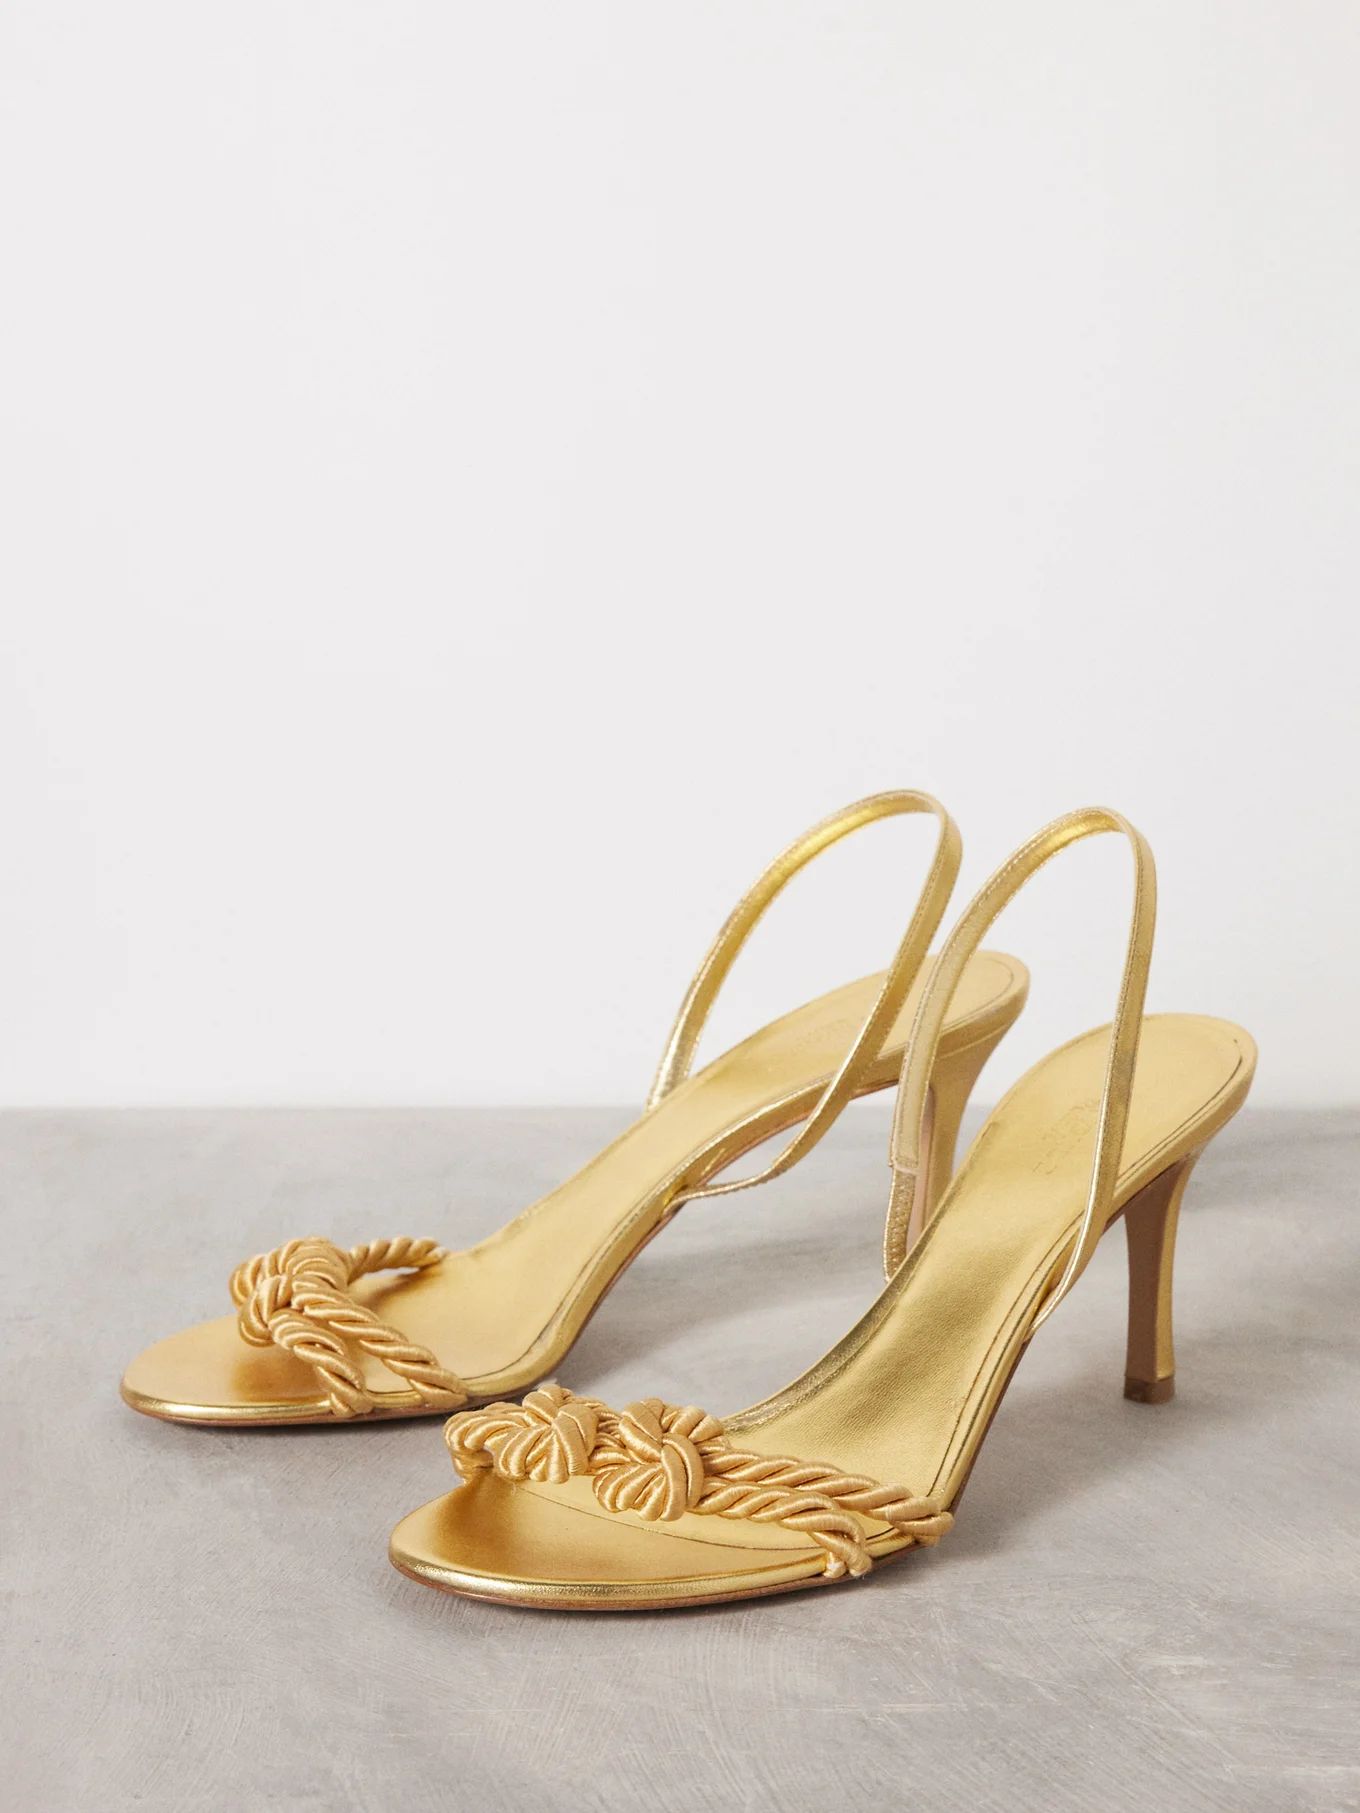 Rope 80 metallic-leather sandals | Le Monde Beryl | Matches (US)